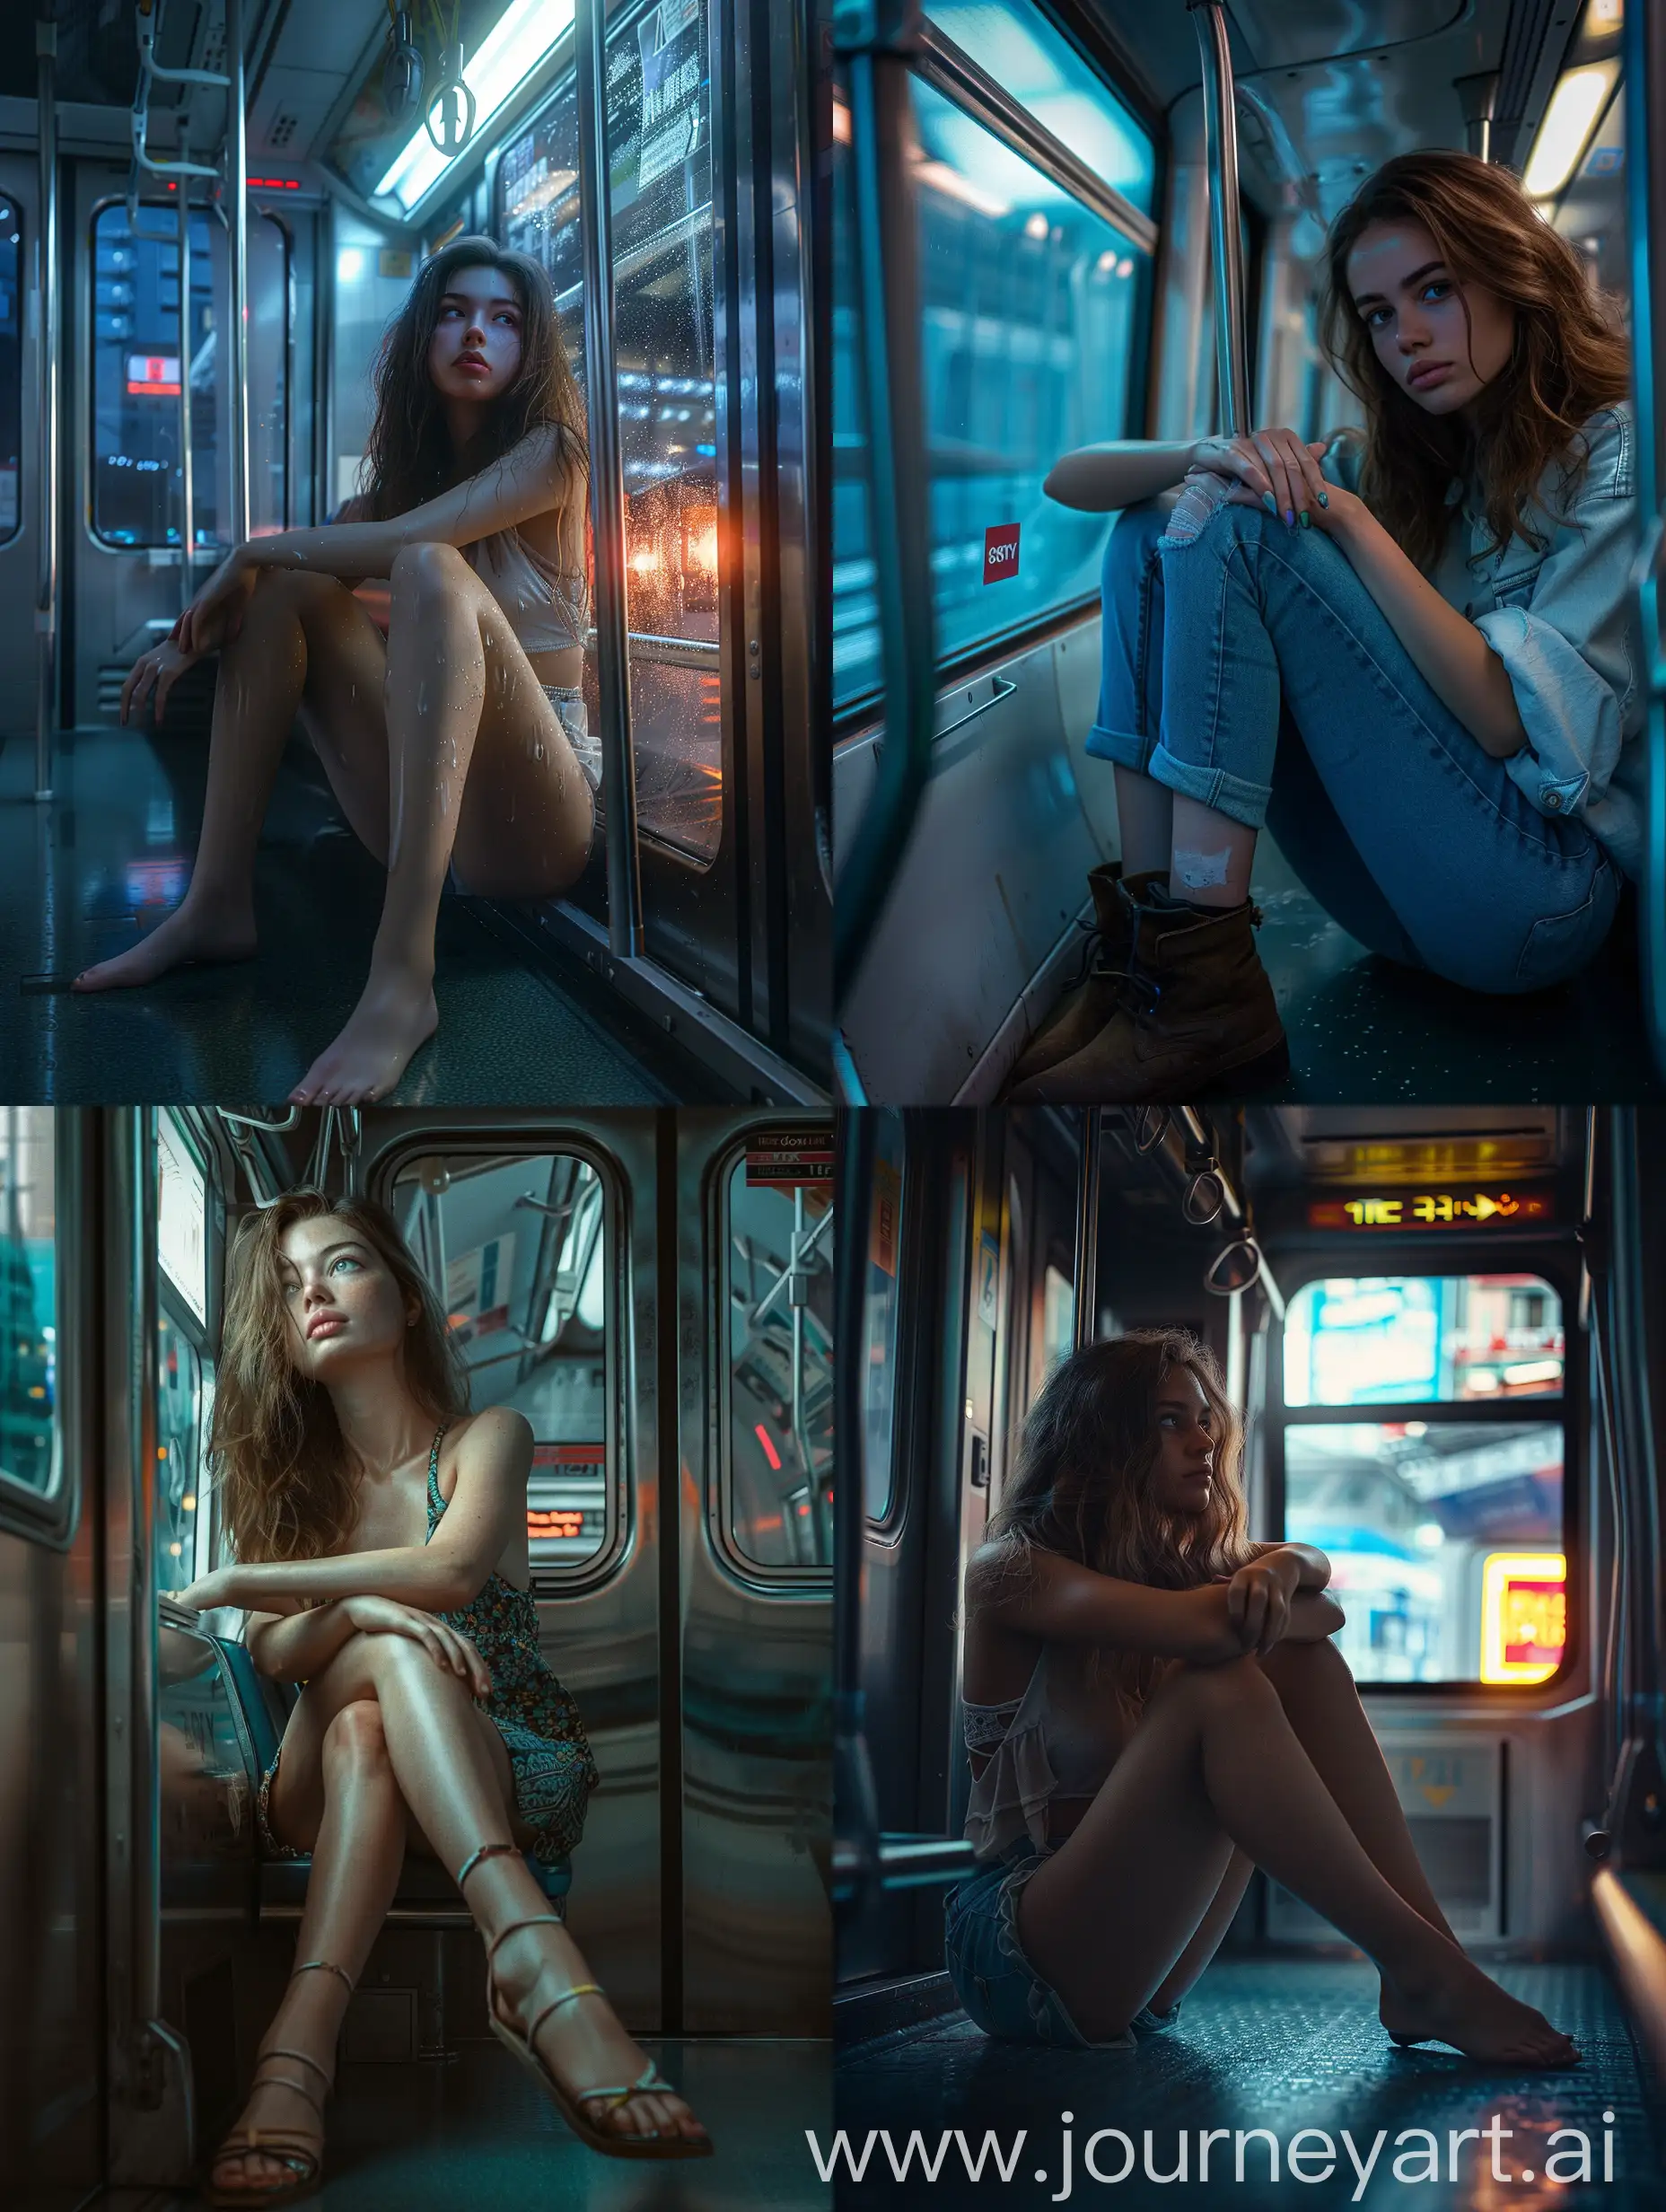 Ultra-realistic photo shot on a Sony a7III of
A young woman sitting by herself inside a metro train, night, her legs crossed, staring out the window.

Camera photo, detailed, lifelike, detailed, HD, 16K Ultra High-res, Full-length portrait, Full shot, head to toes, wide angle, zoomed out, full figure.